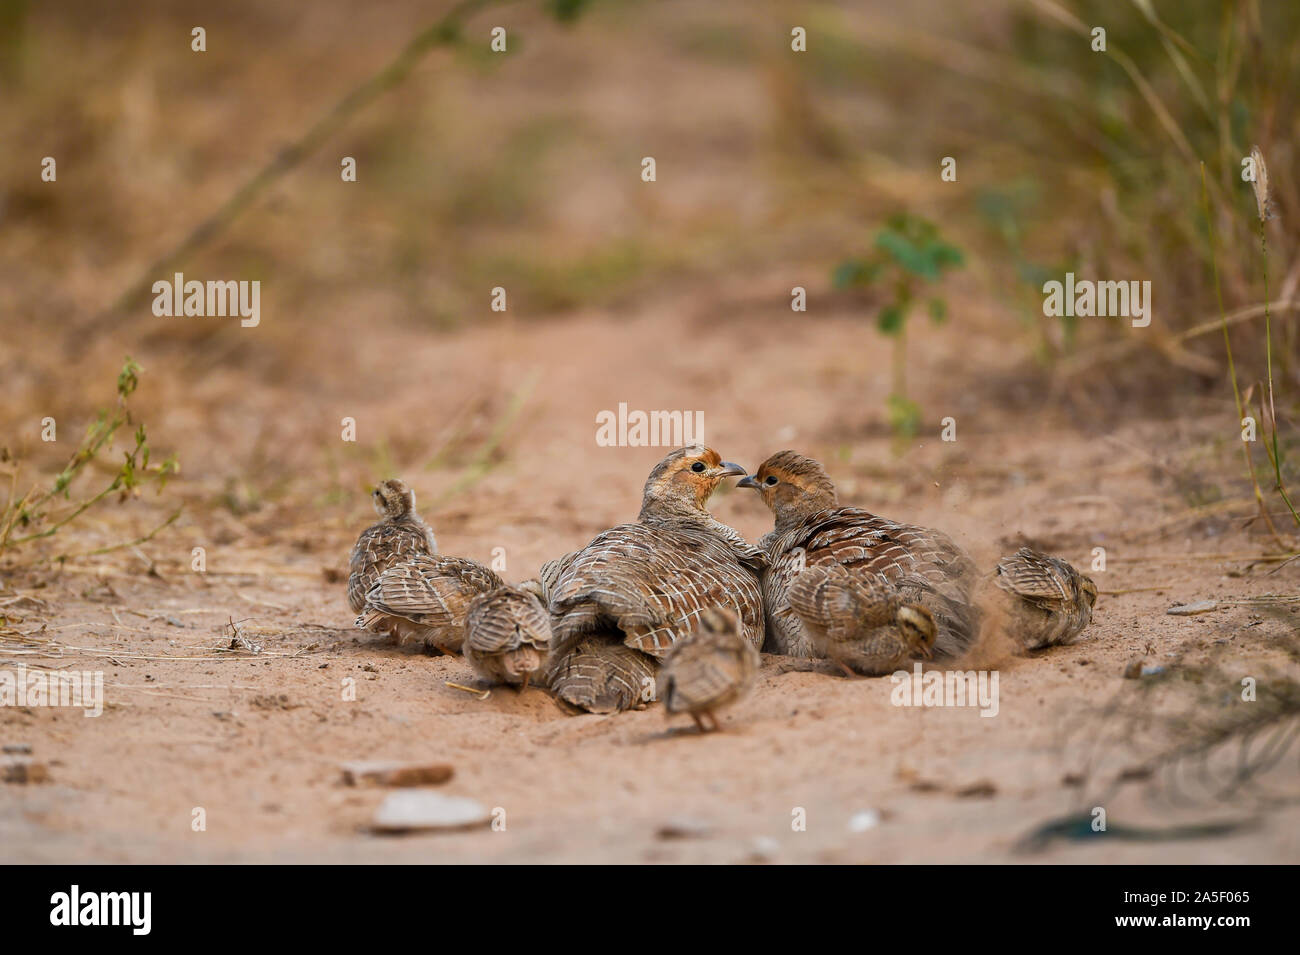 grey francolin or grey partridge or Francolinus pondicerianus family with chicks walking together on jungle track at Ranthambore national park, india Stock Photo